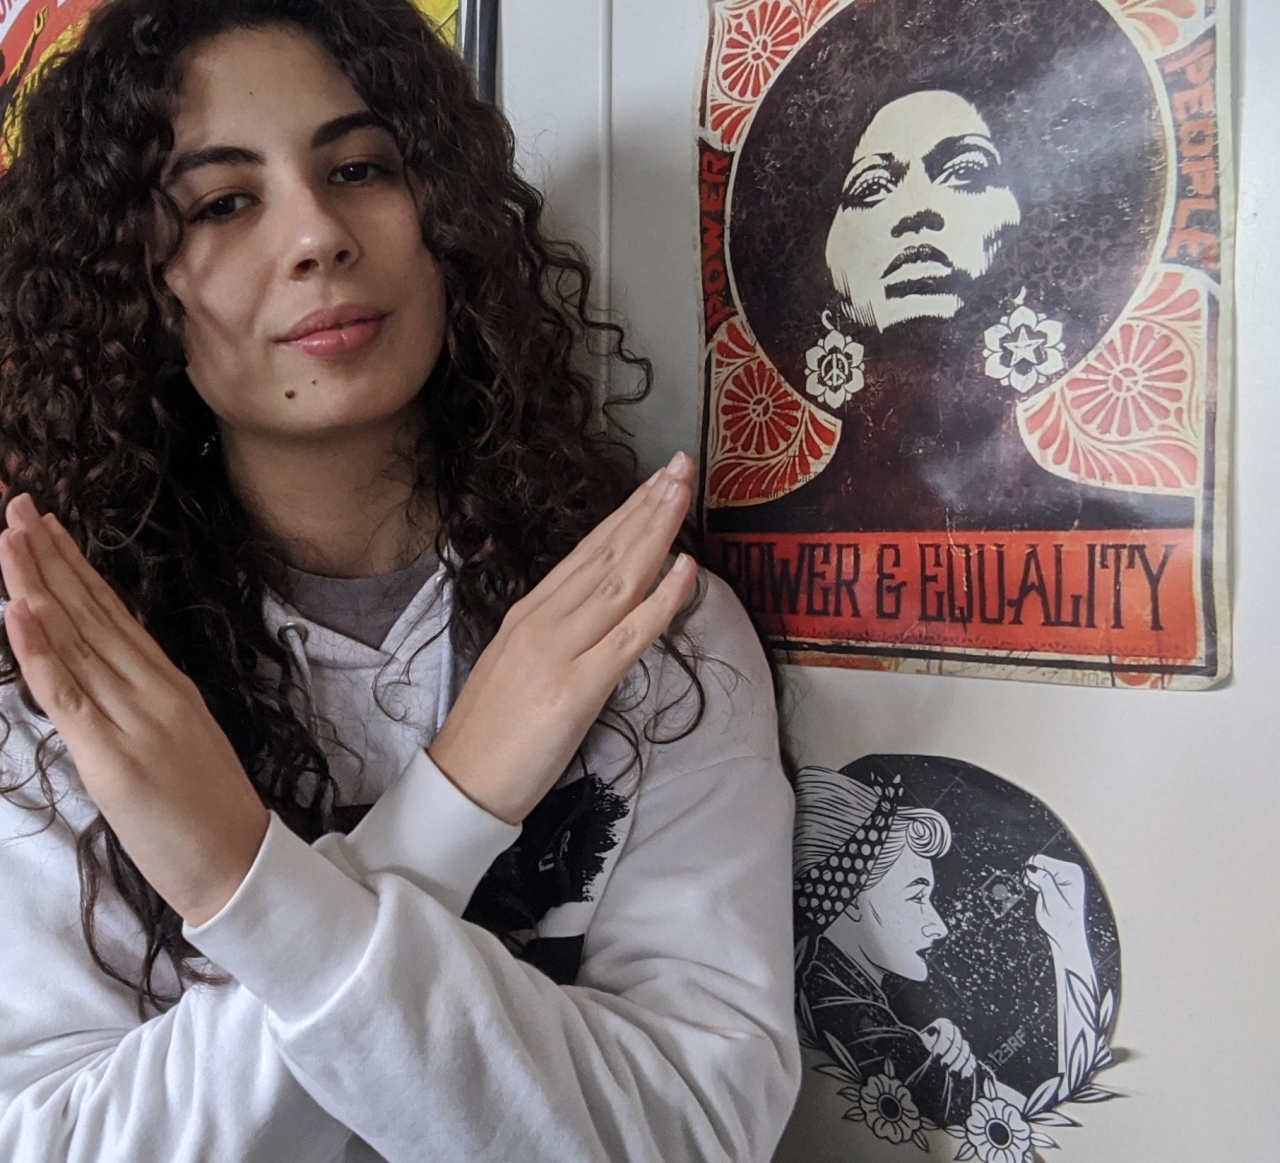 Woman standing next to a poster that reads Power & Equality, crossing her arms